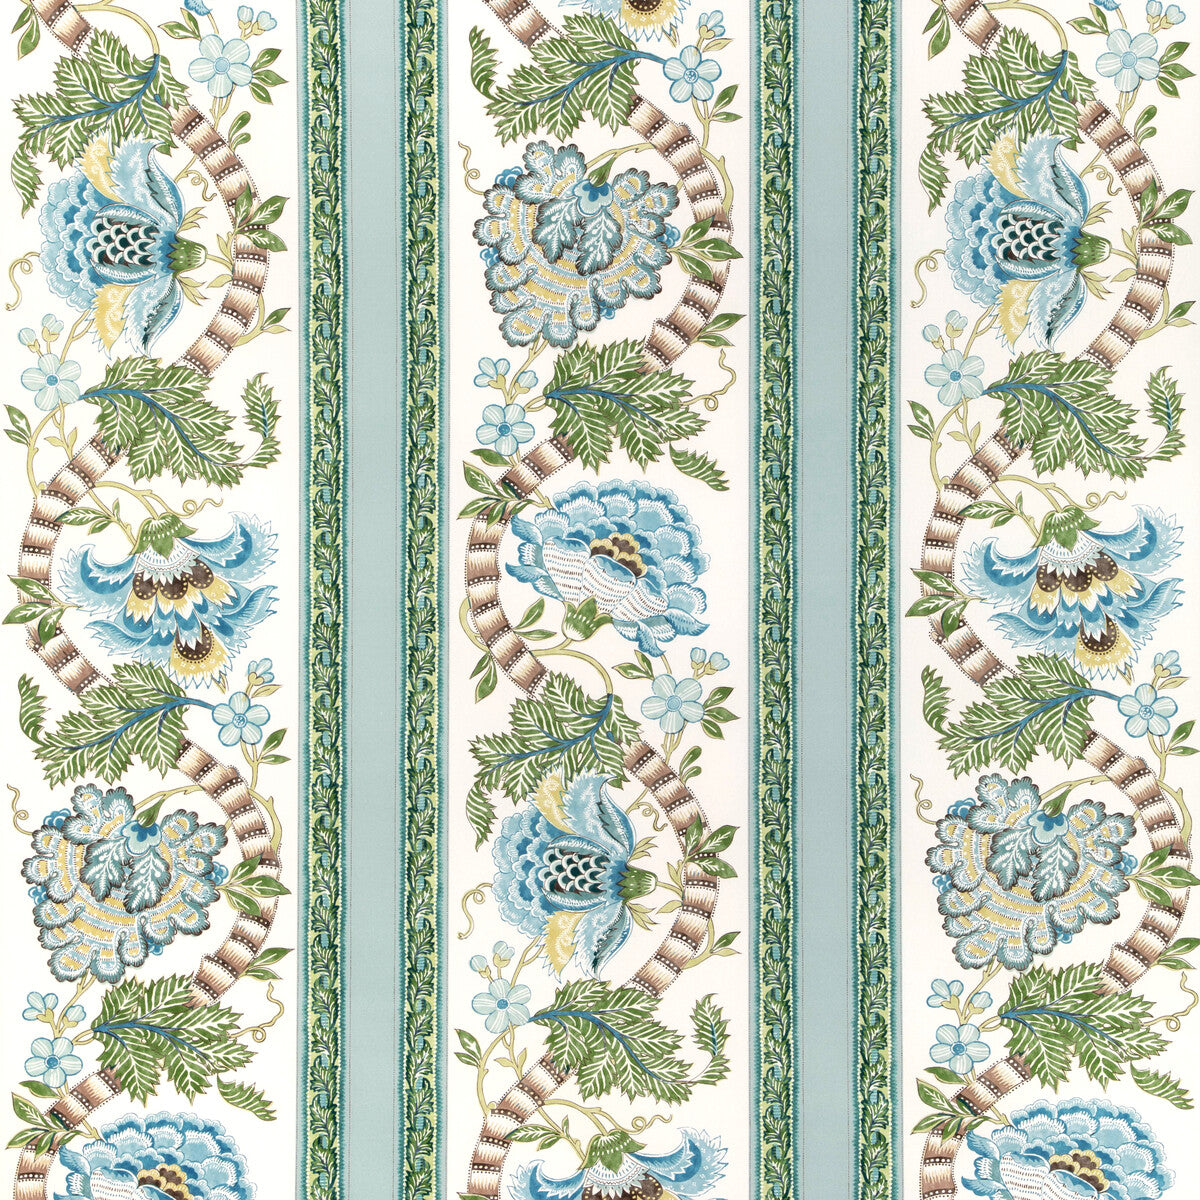 Lauris Print fabric in aqua/leaf color - pattern 8023106.353.0 - by Brunschwig &amp; Fils in the Cadenet collection